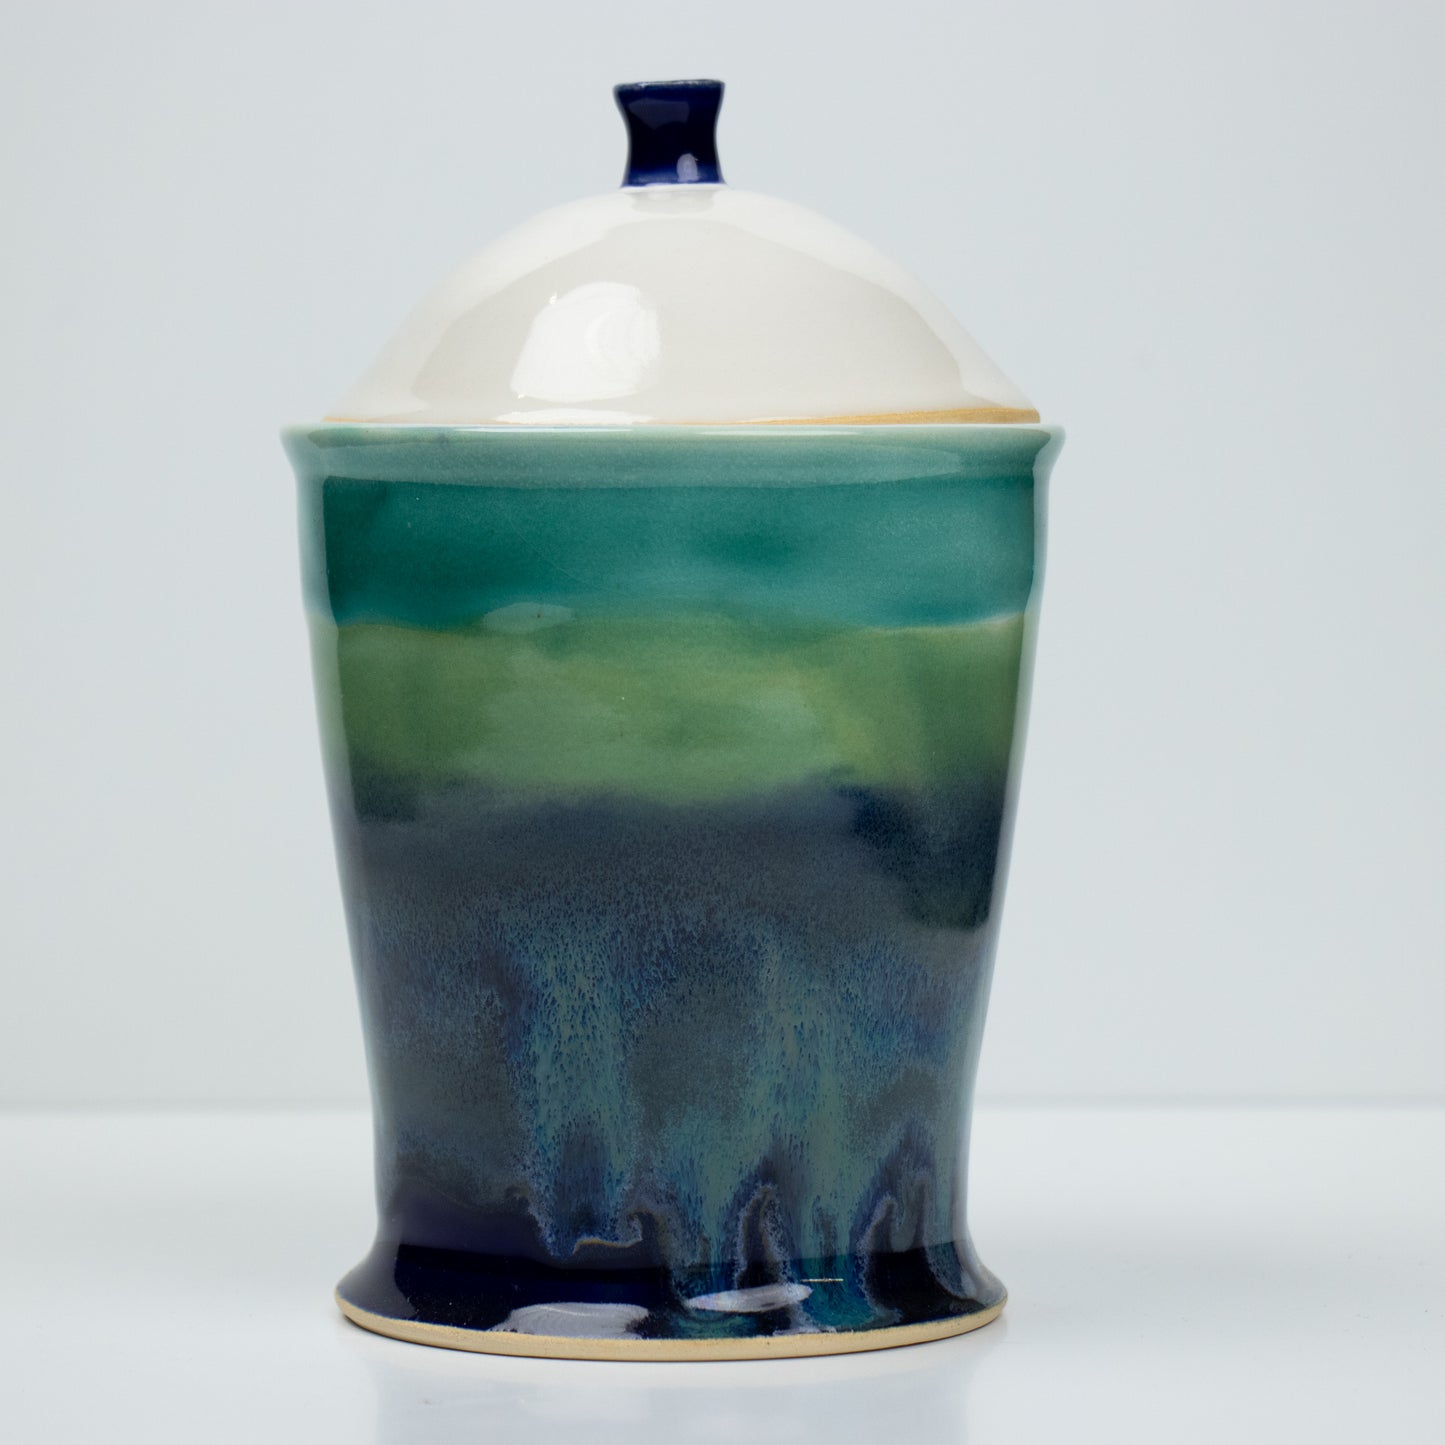 Blue-Green Canister with White Lid